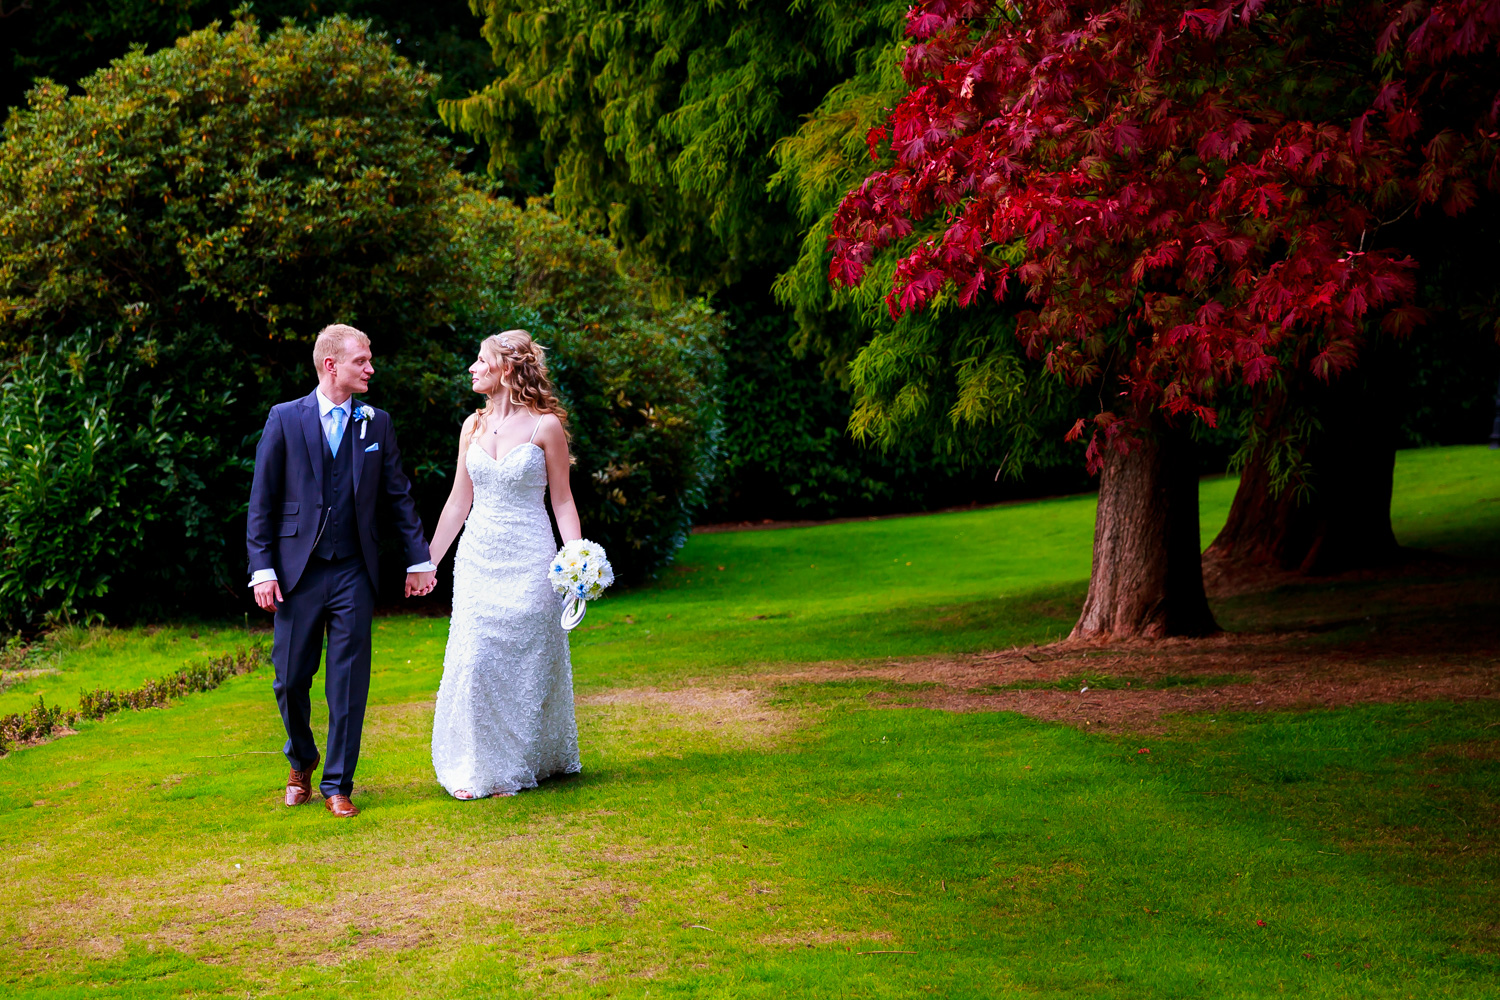 The bride and groom walking hand in hand in the beautiful grounds